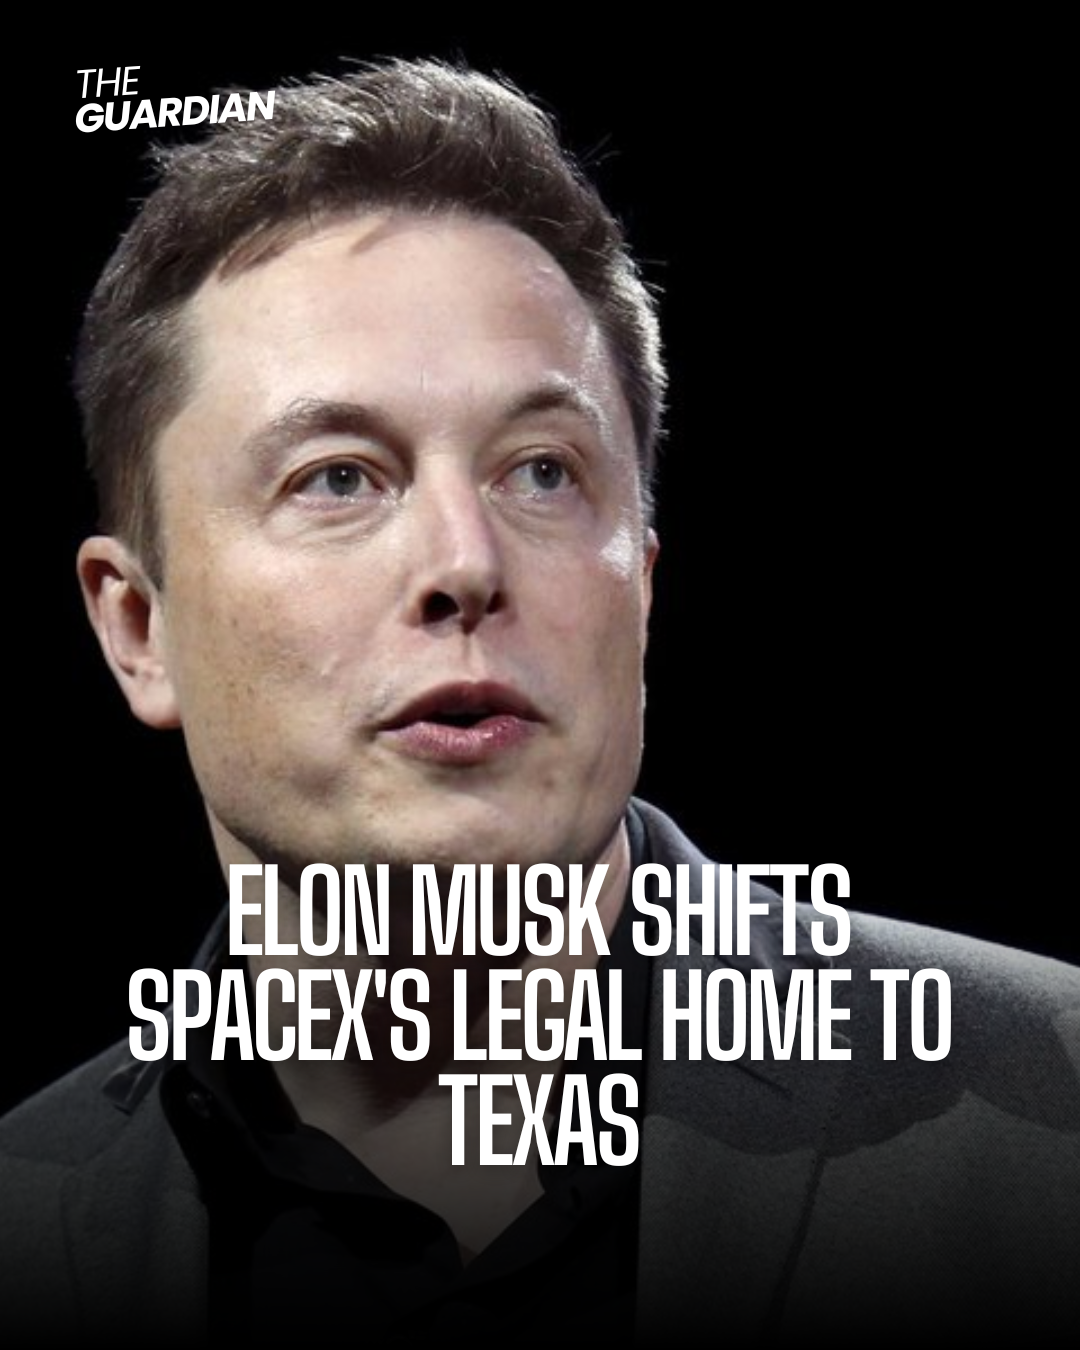 Elon Musk has announced that his rocket firm, SpaceX, will relocate its legal headquarters from Delaware to Texas.